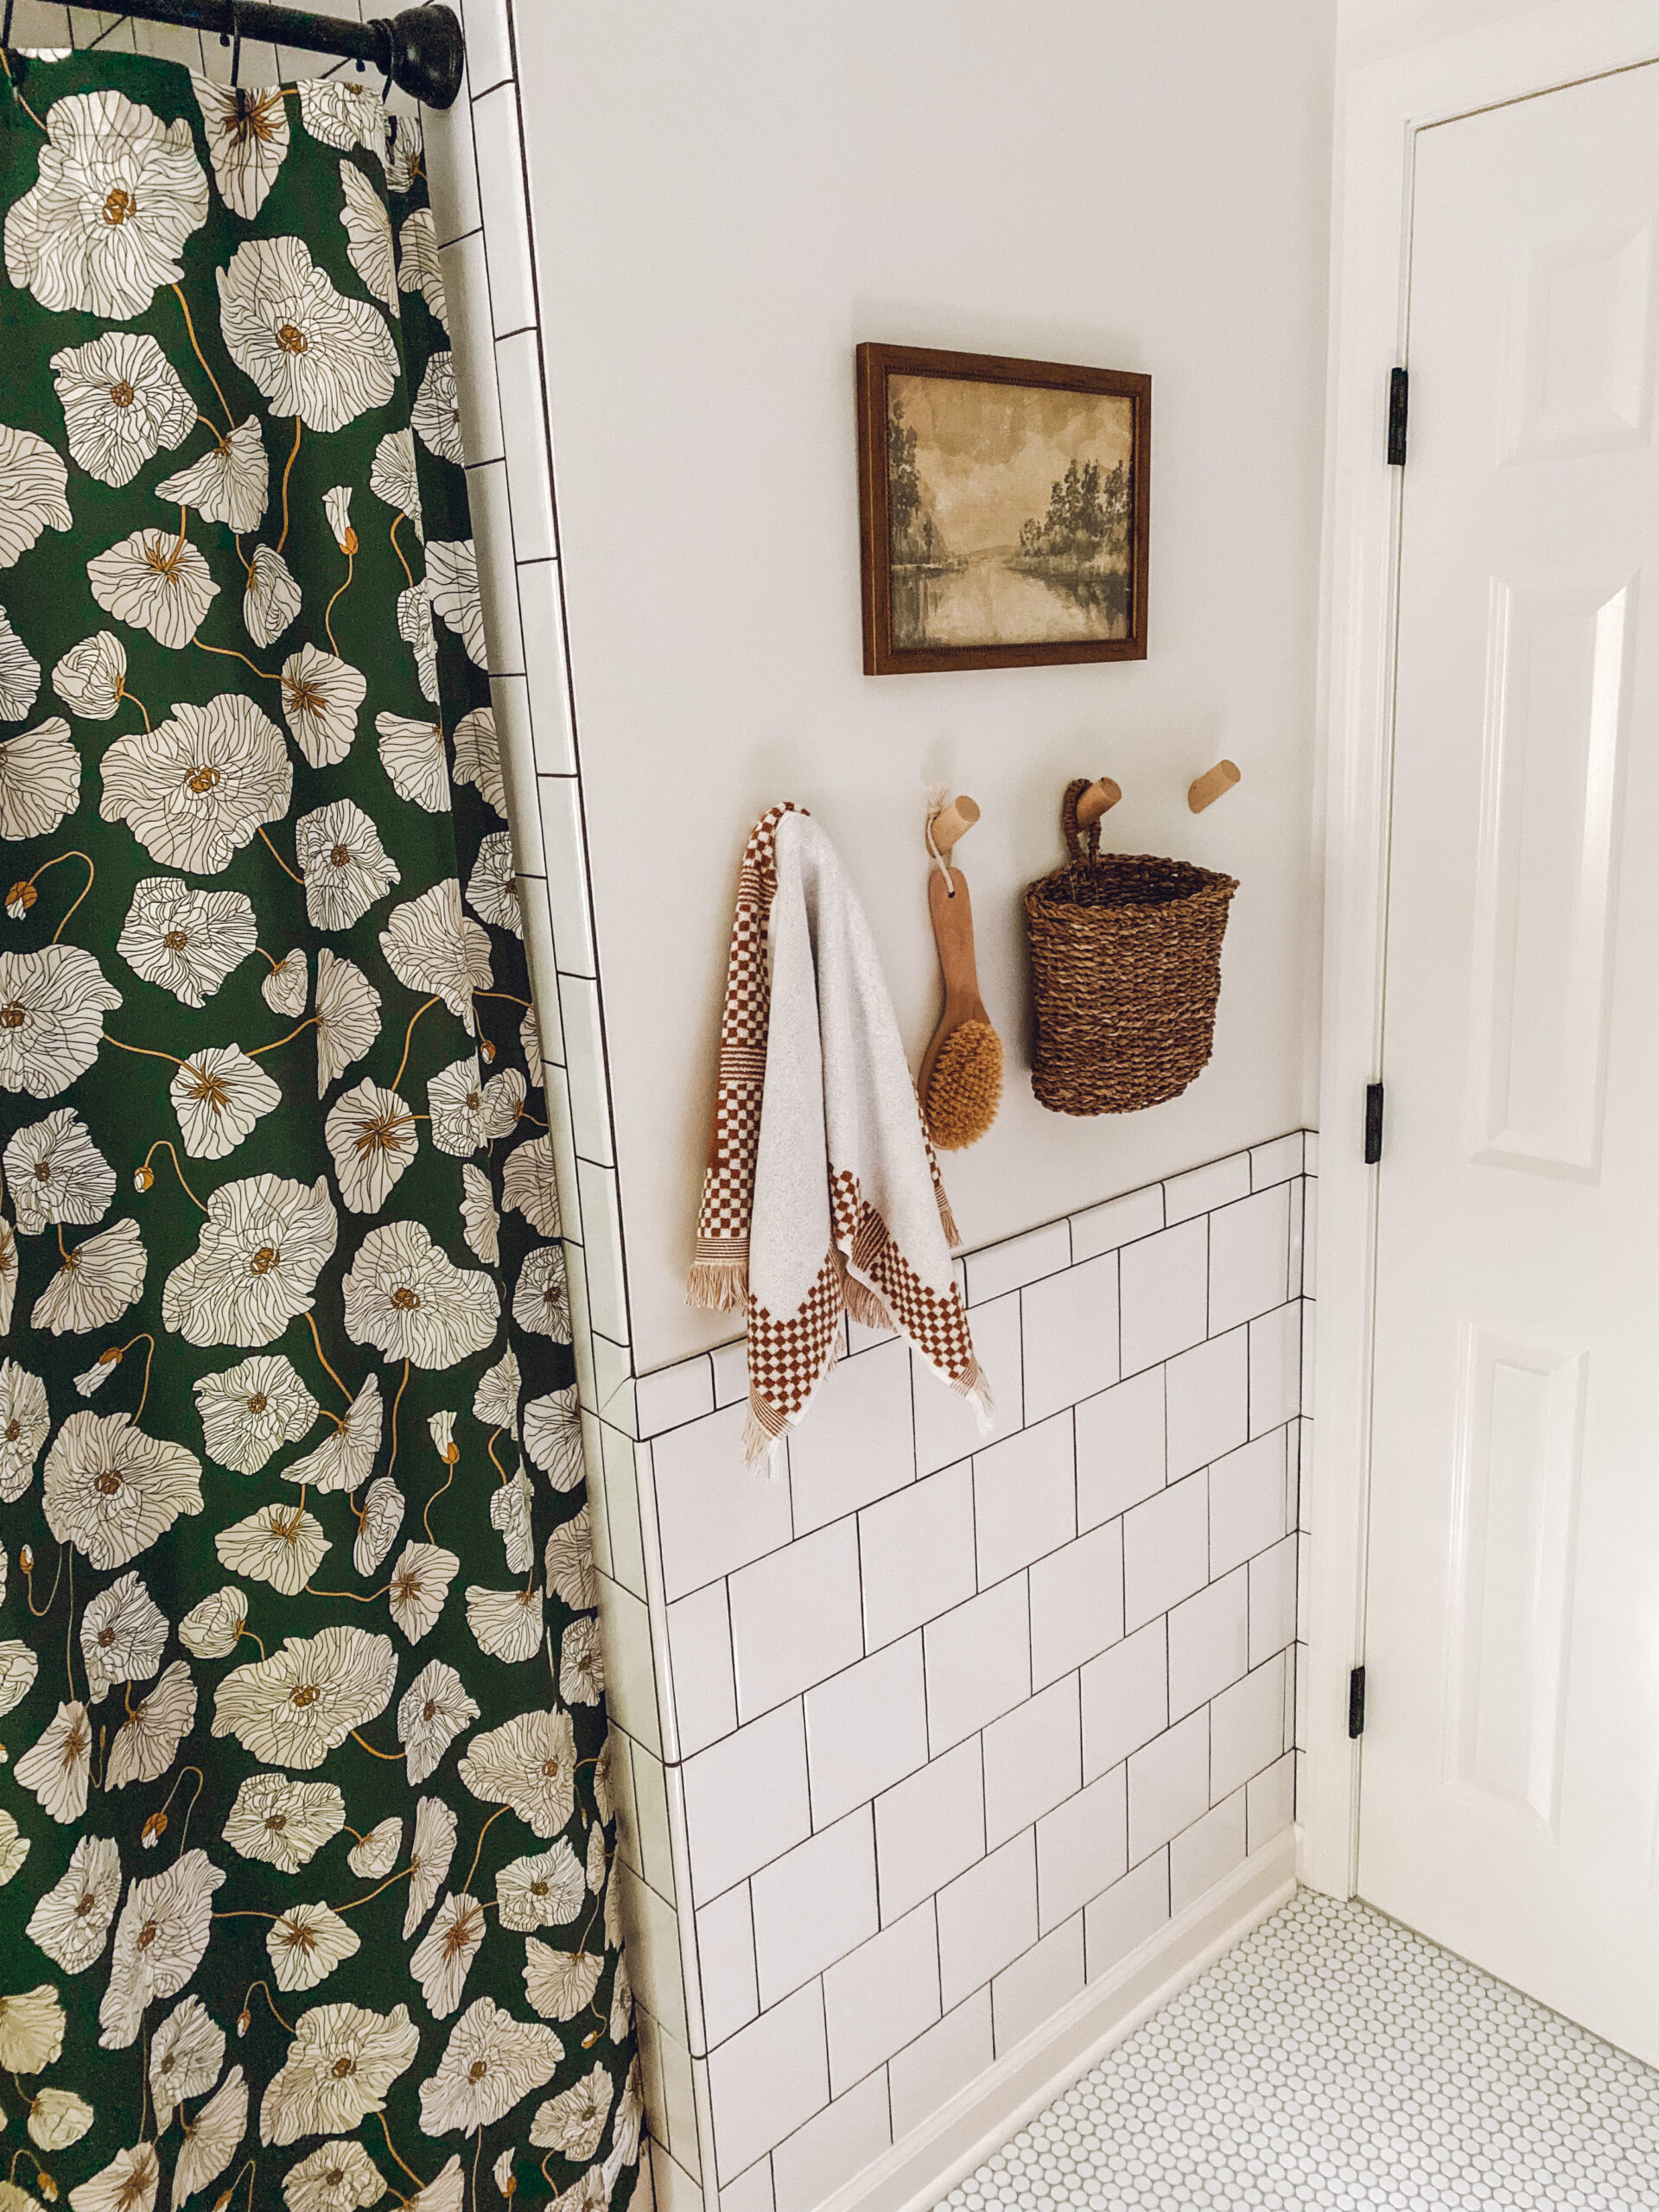 How much does a bathroom remodel cost?